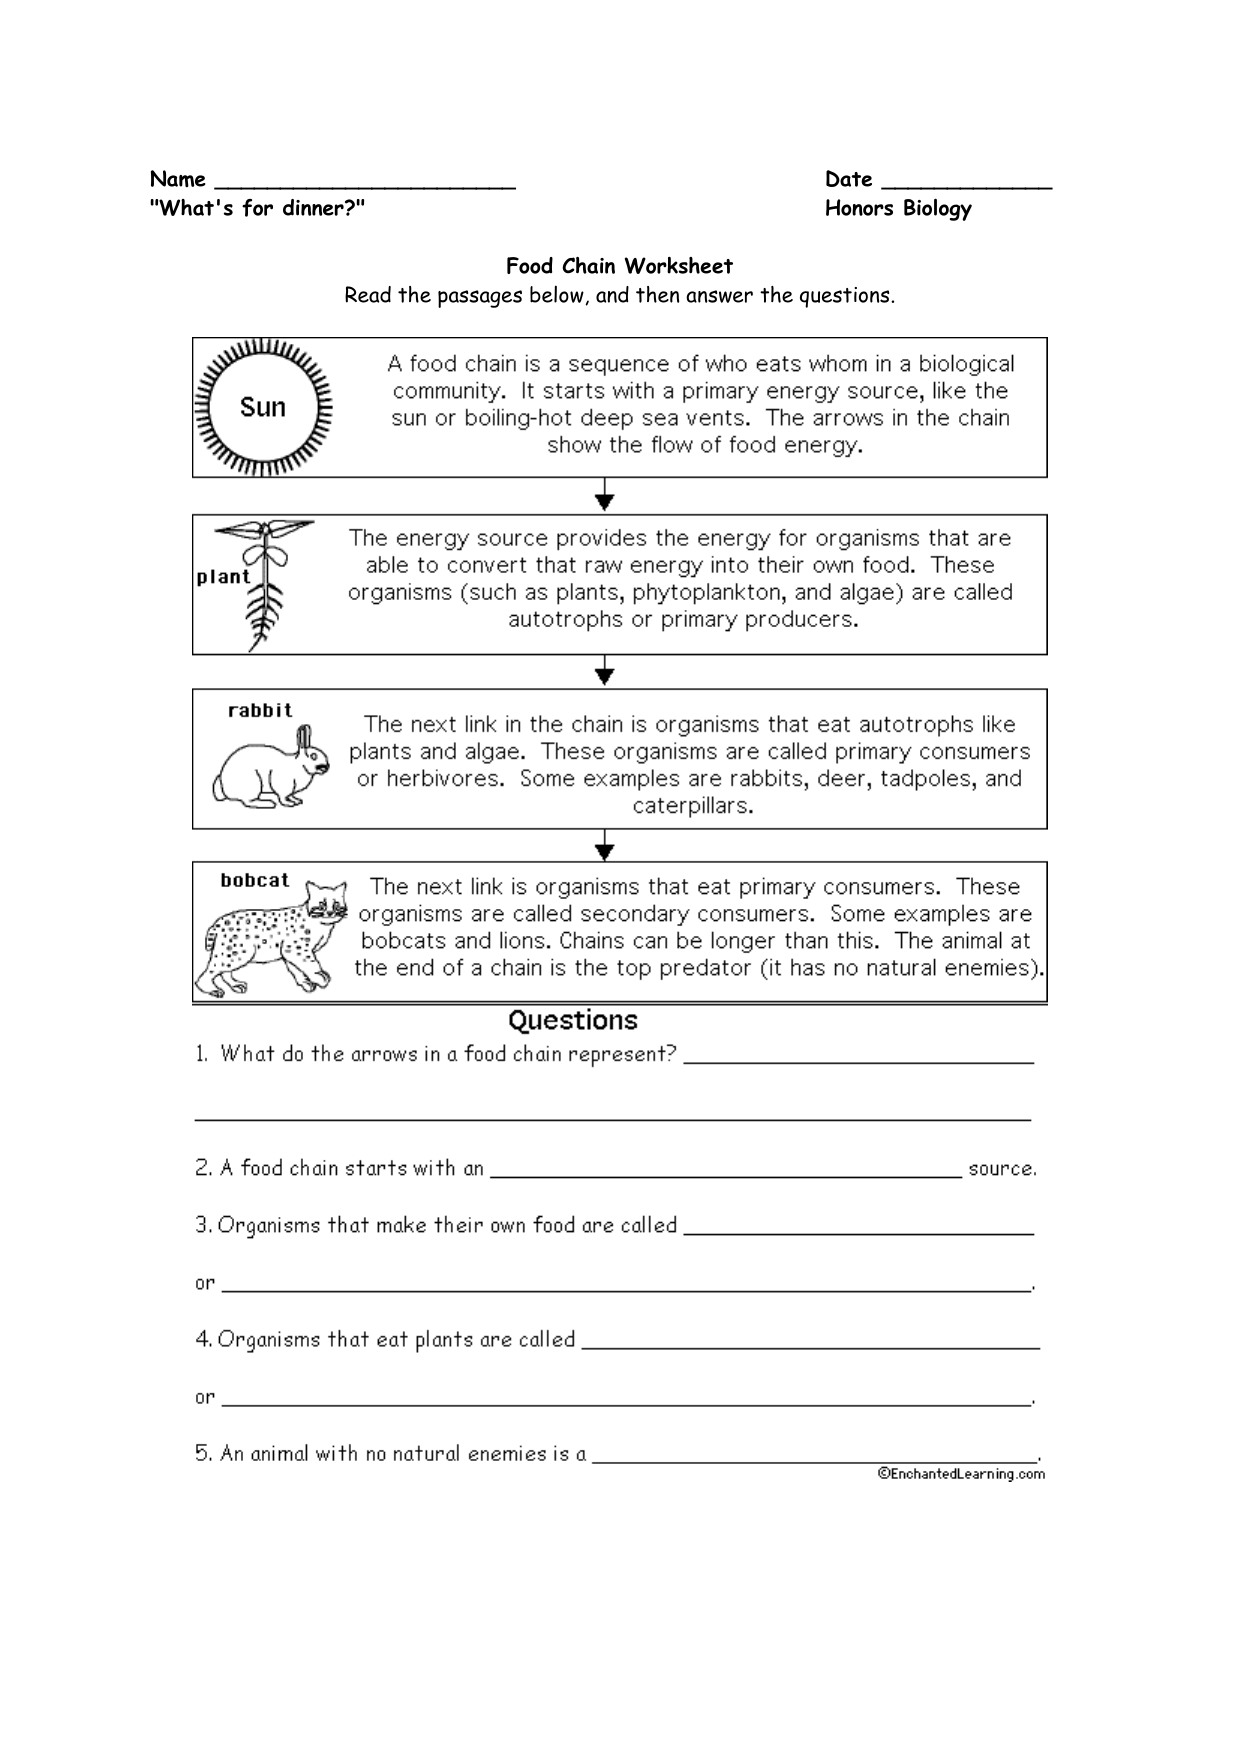 Food Chain and Food web Worksheets Pertaining To Food Chain Worksheet Answers